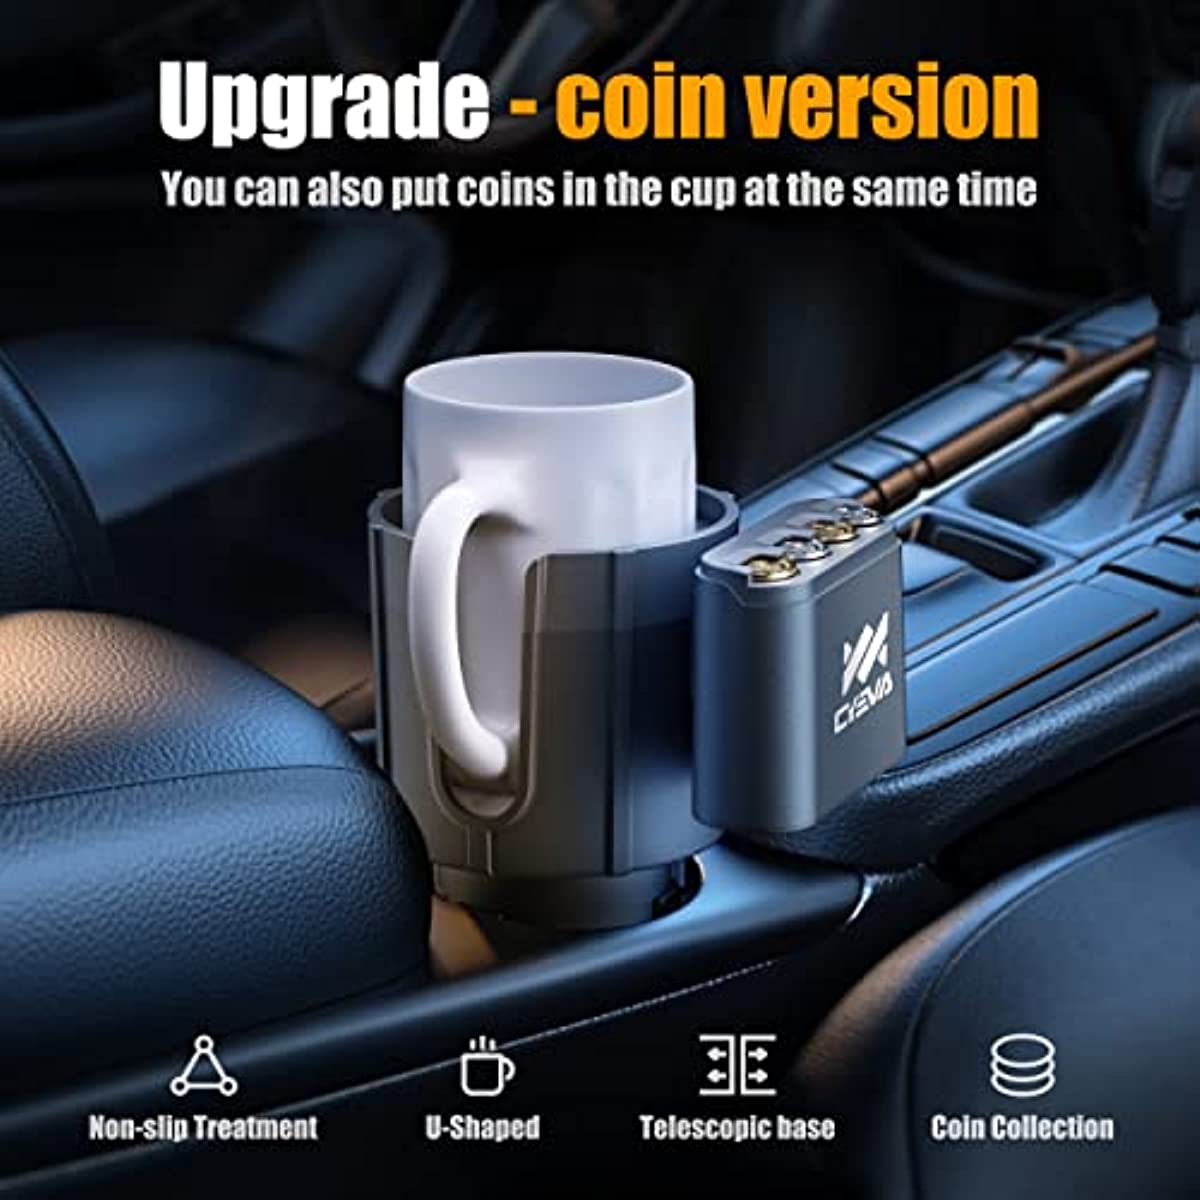 Yous Auto Car Cup Holder Car Air Vent Cup Stand Non-Slip Car